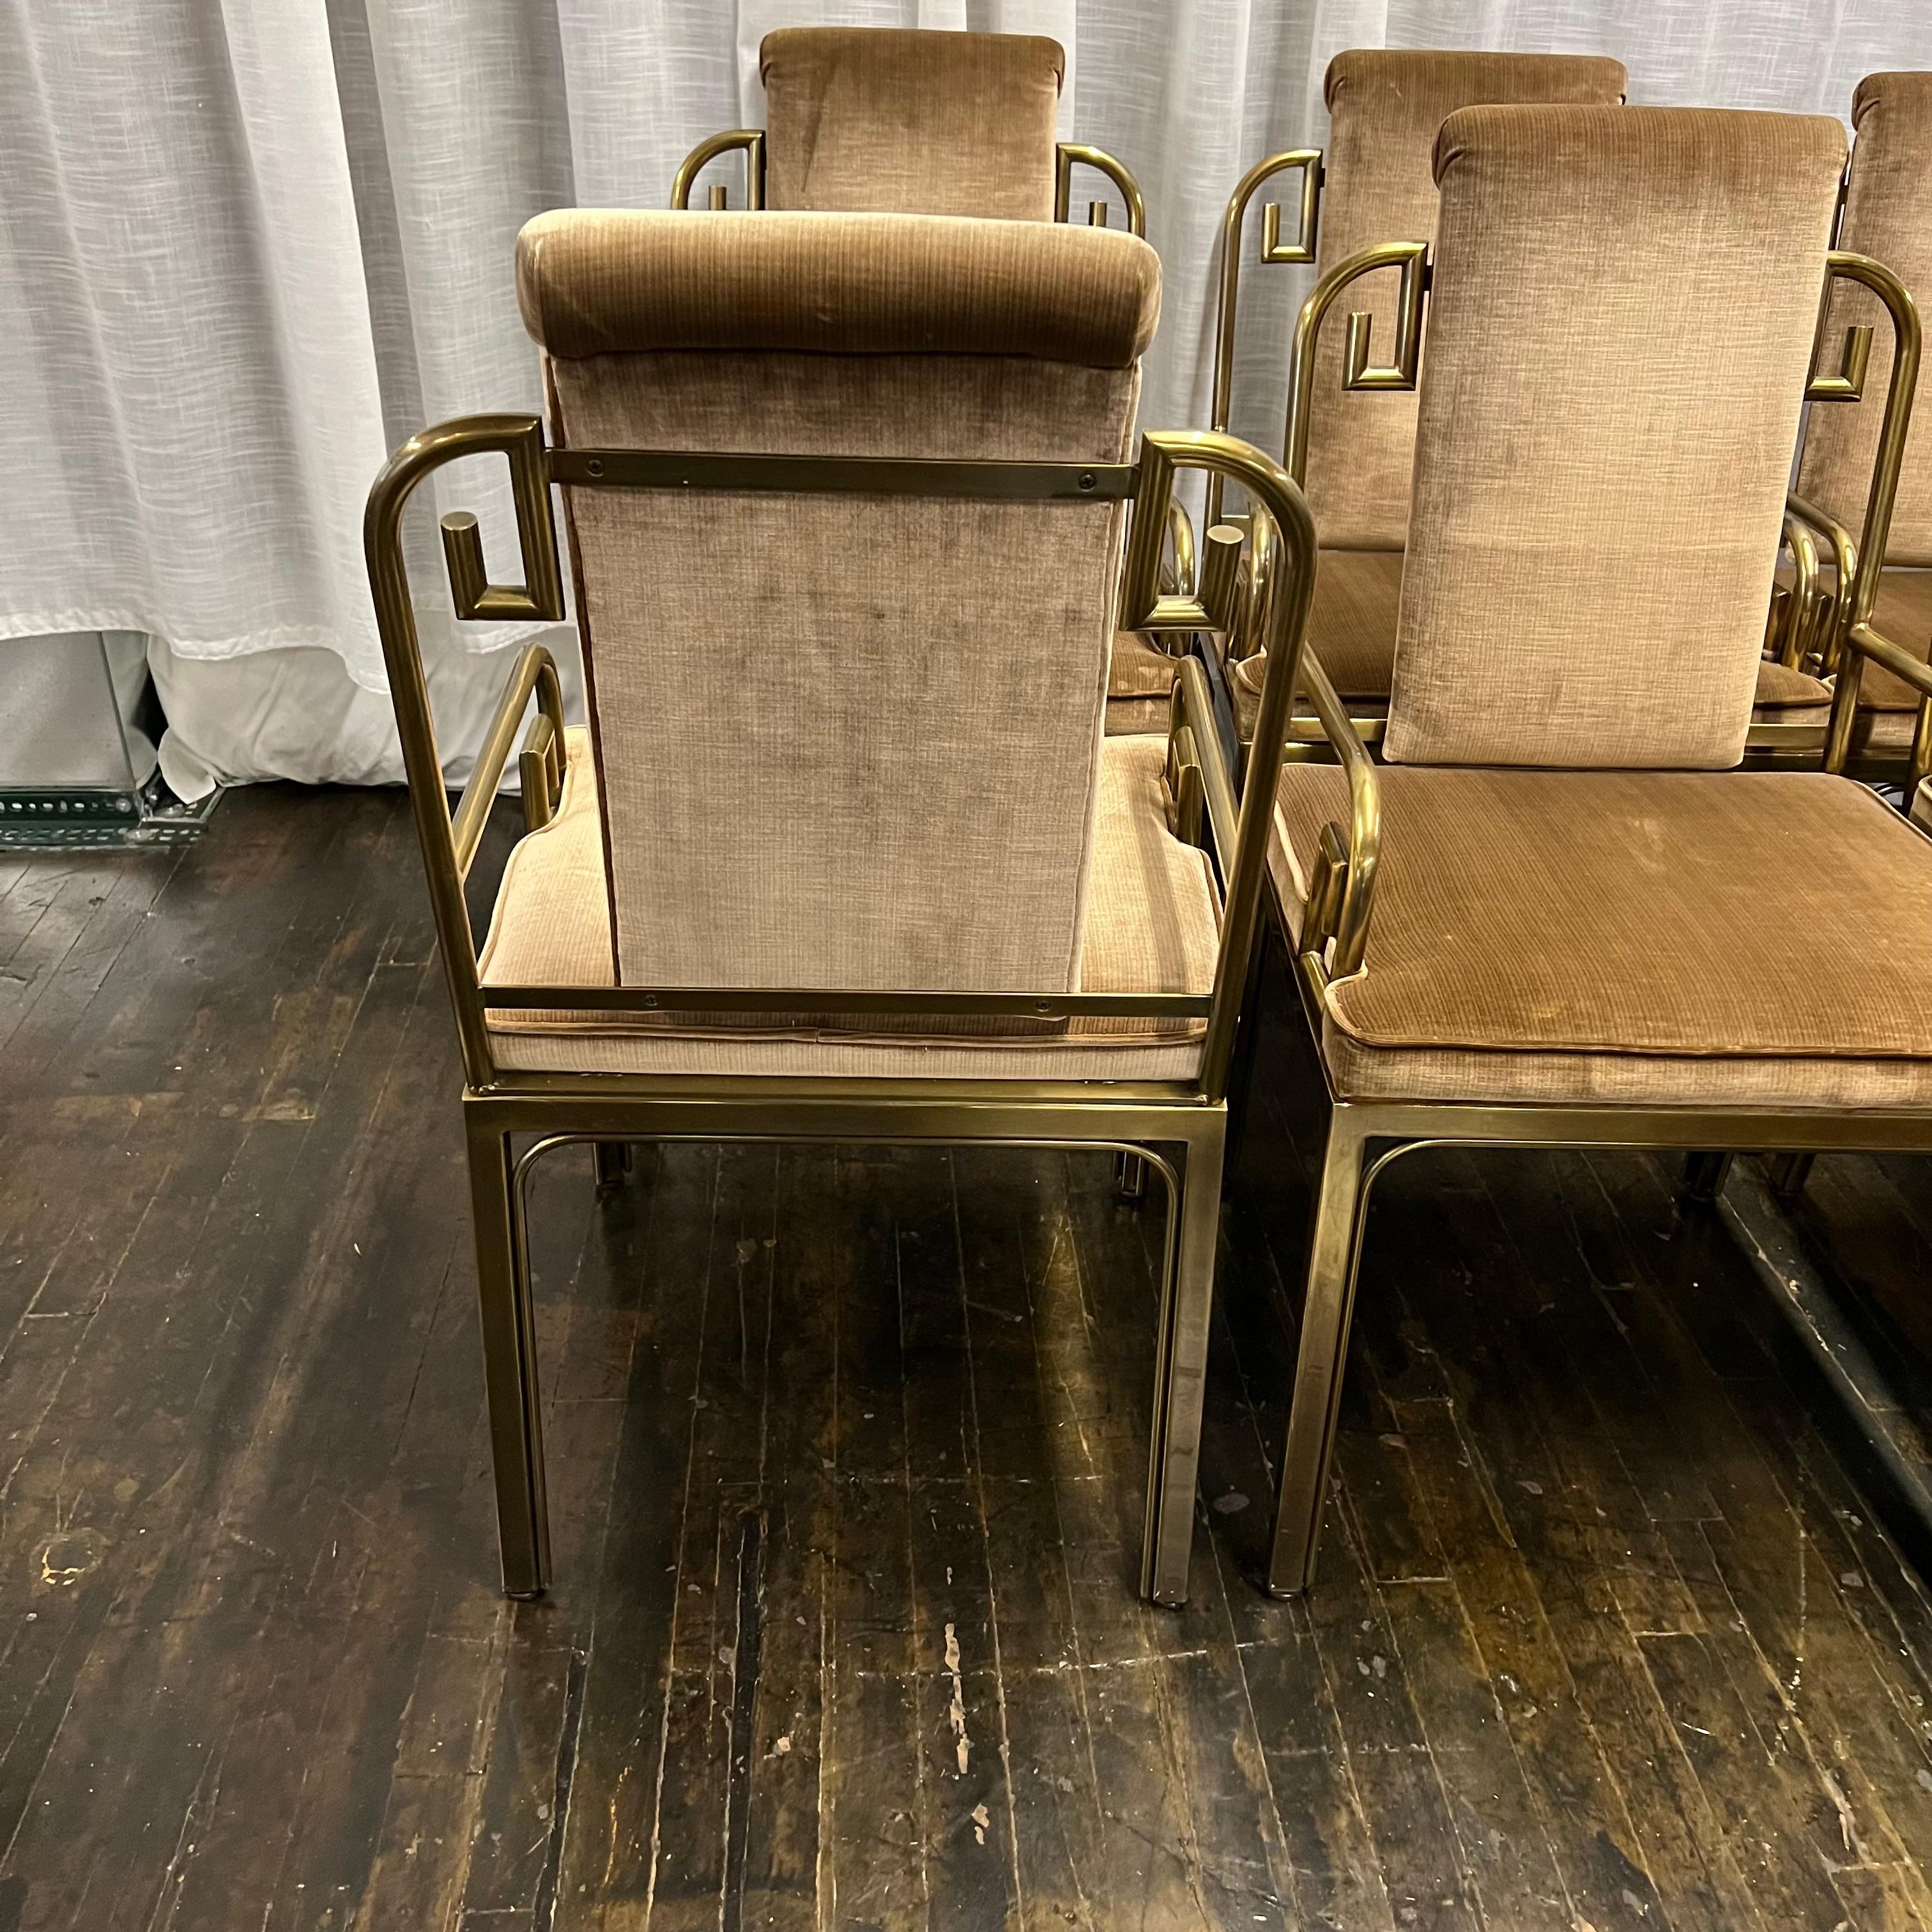 One Mastercraft Hollywood Regency style Greek Key dining chairs with arms designed by Bernhard Rohne.  These chairs are from a North Shore estate.  They have a lovely patina and their velvet upholstery is best described as a cross between a bronze